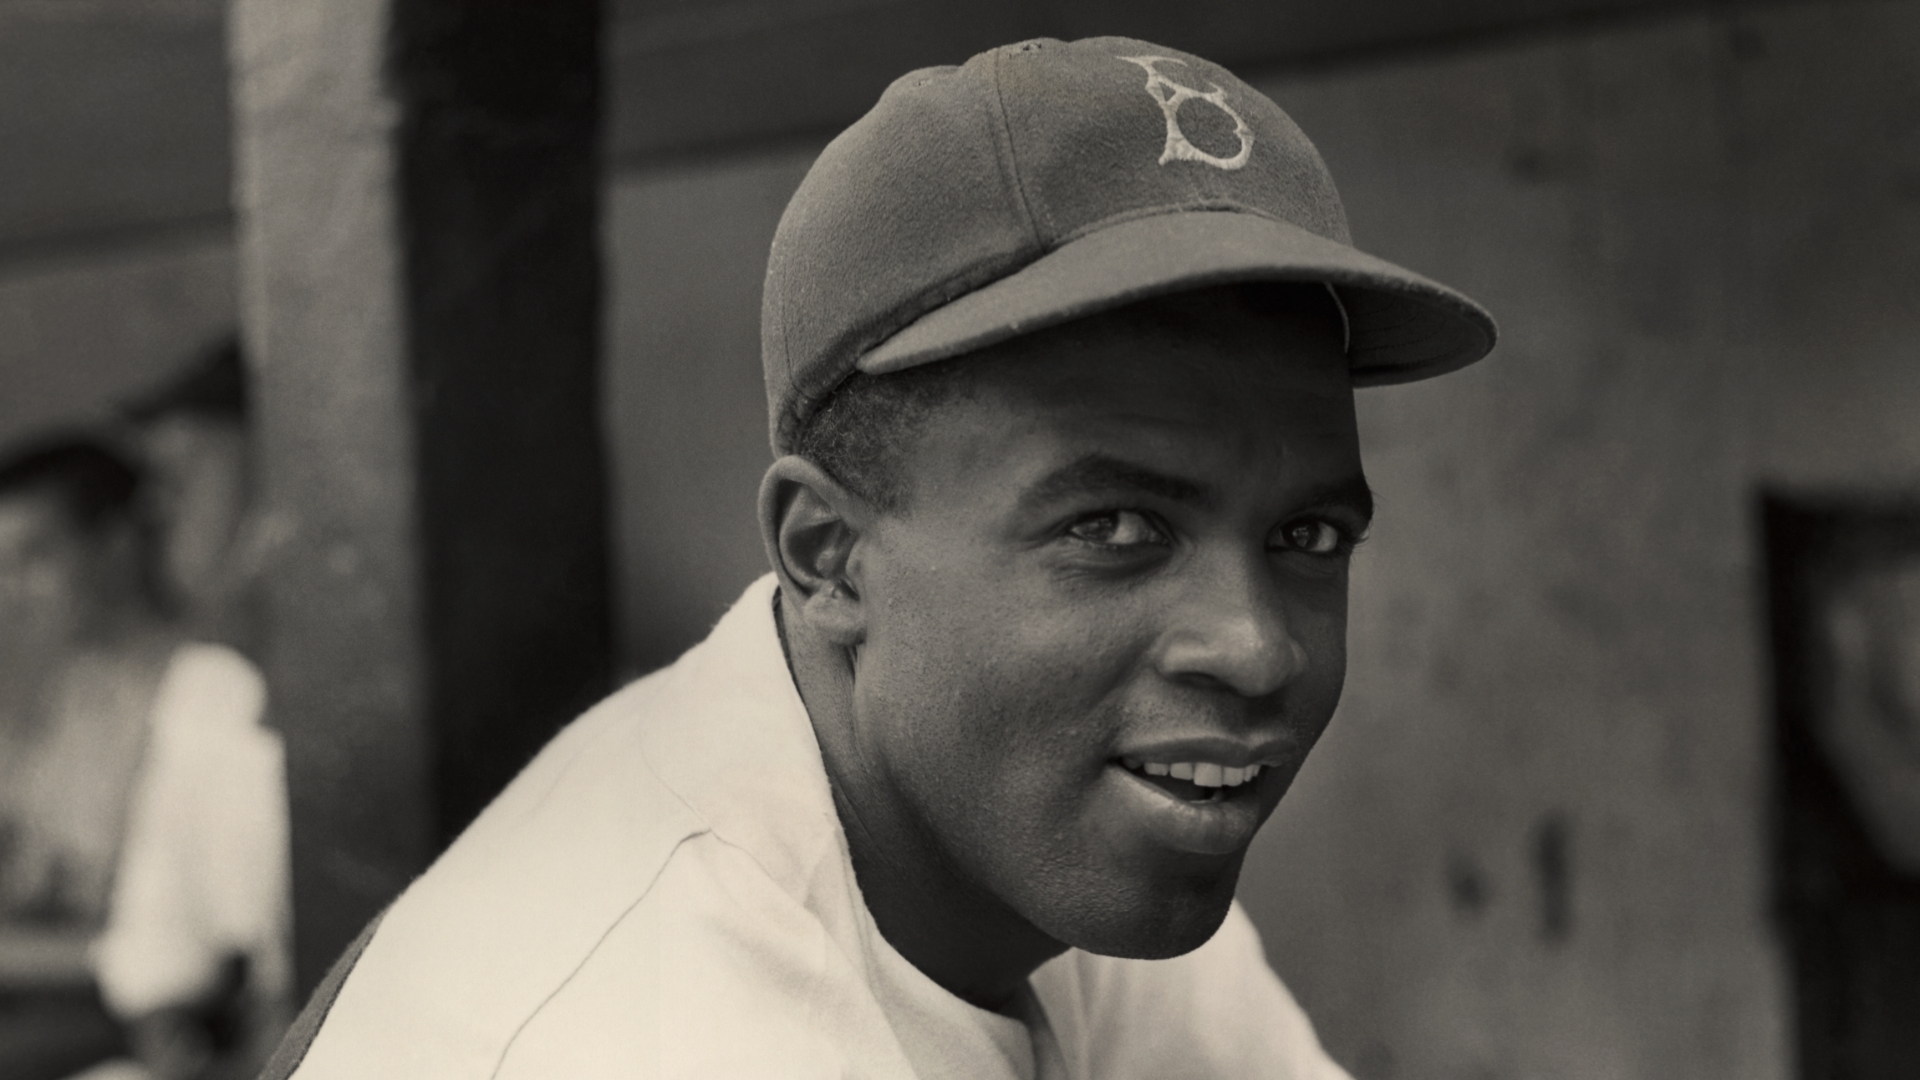 Jackie Robinson's message still resonates with society today